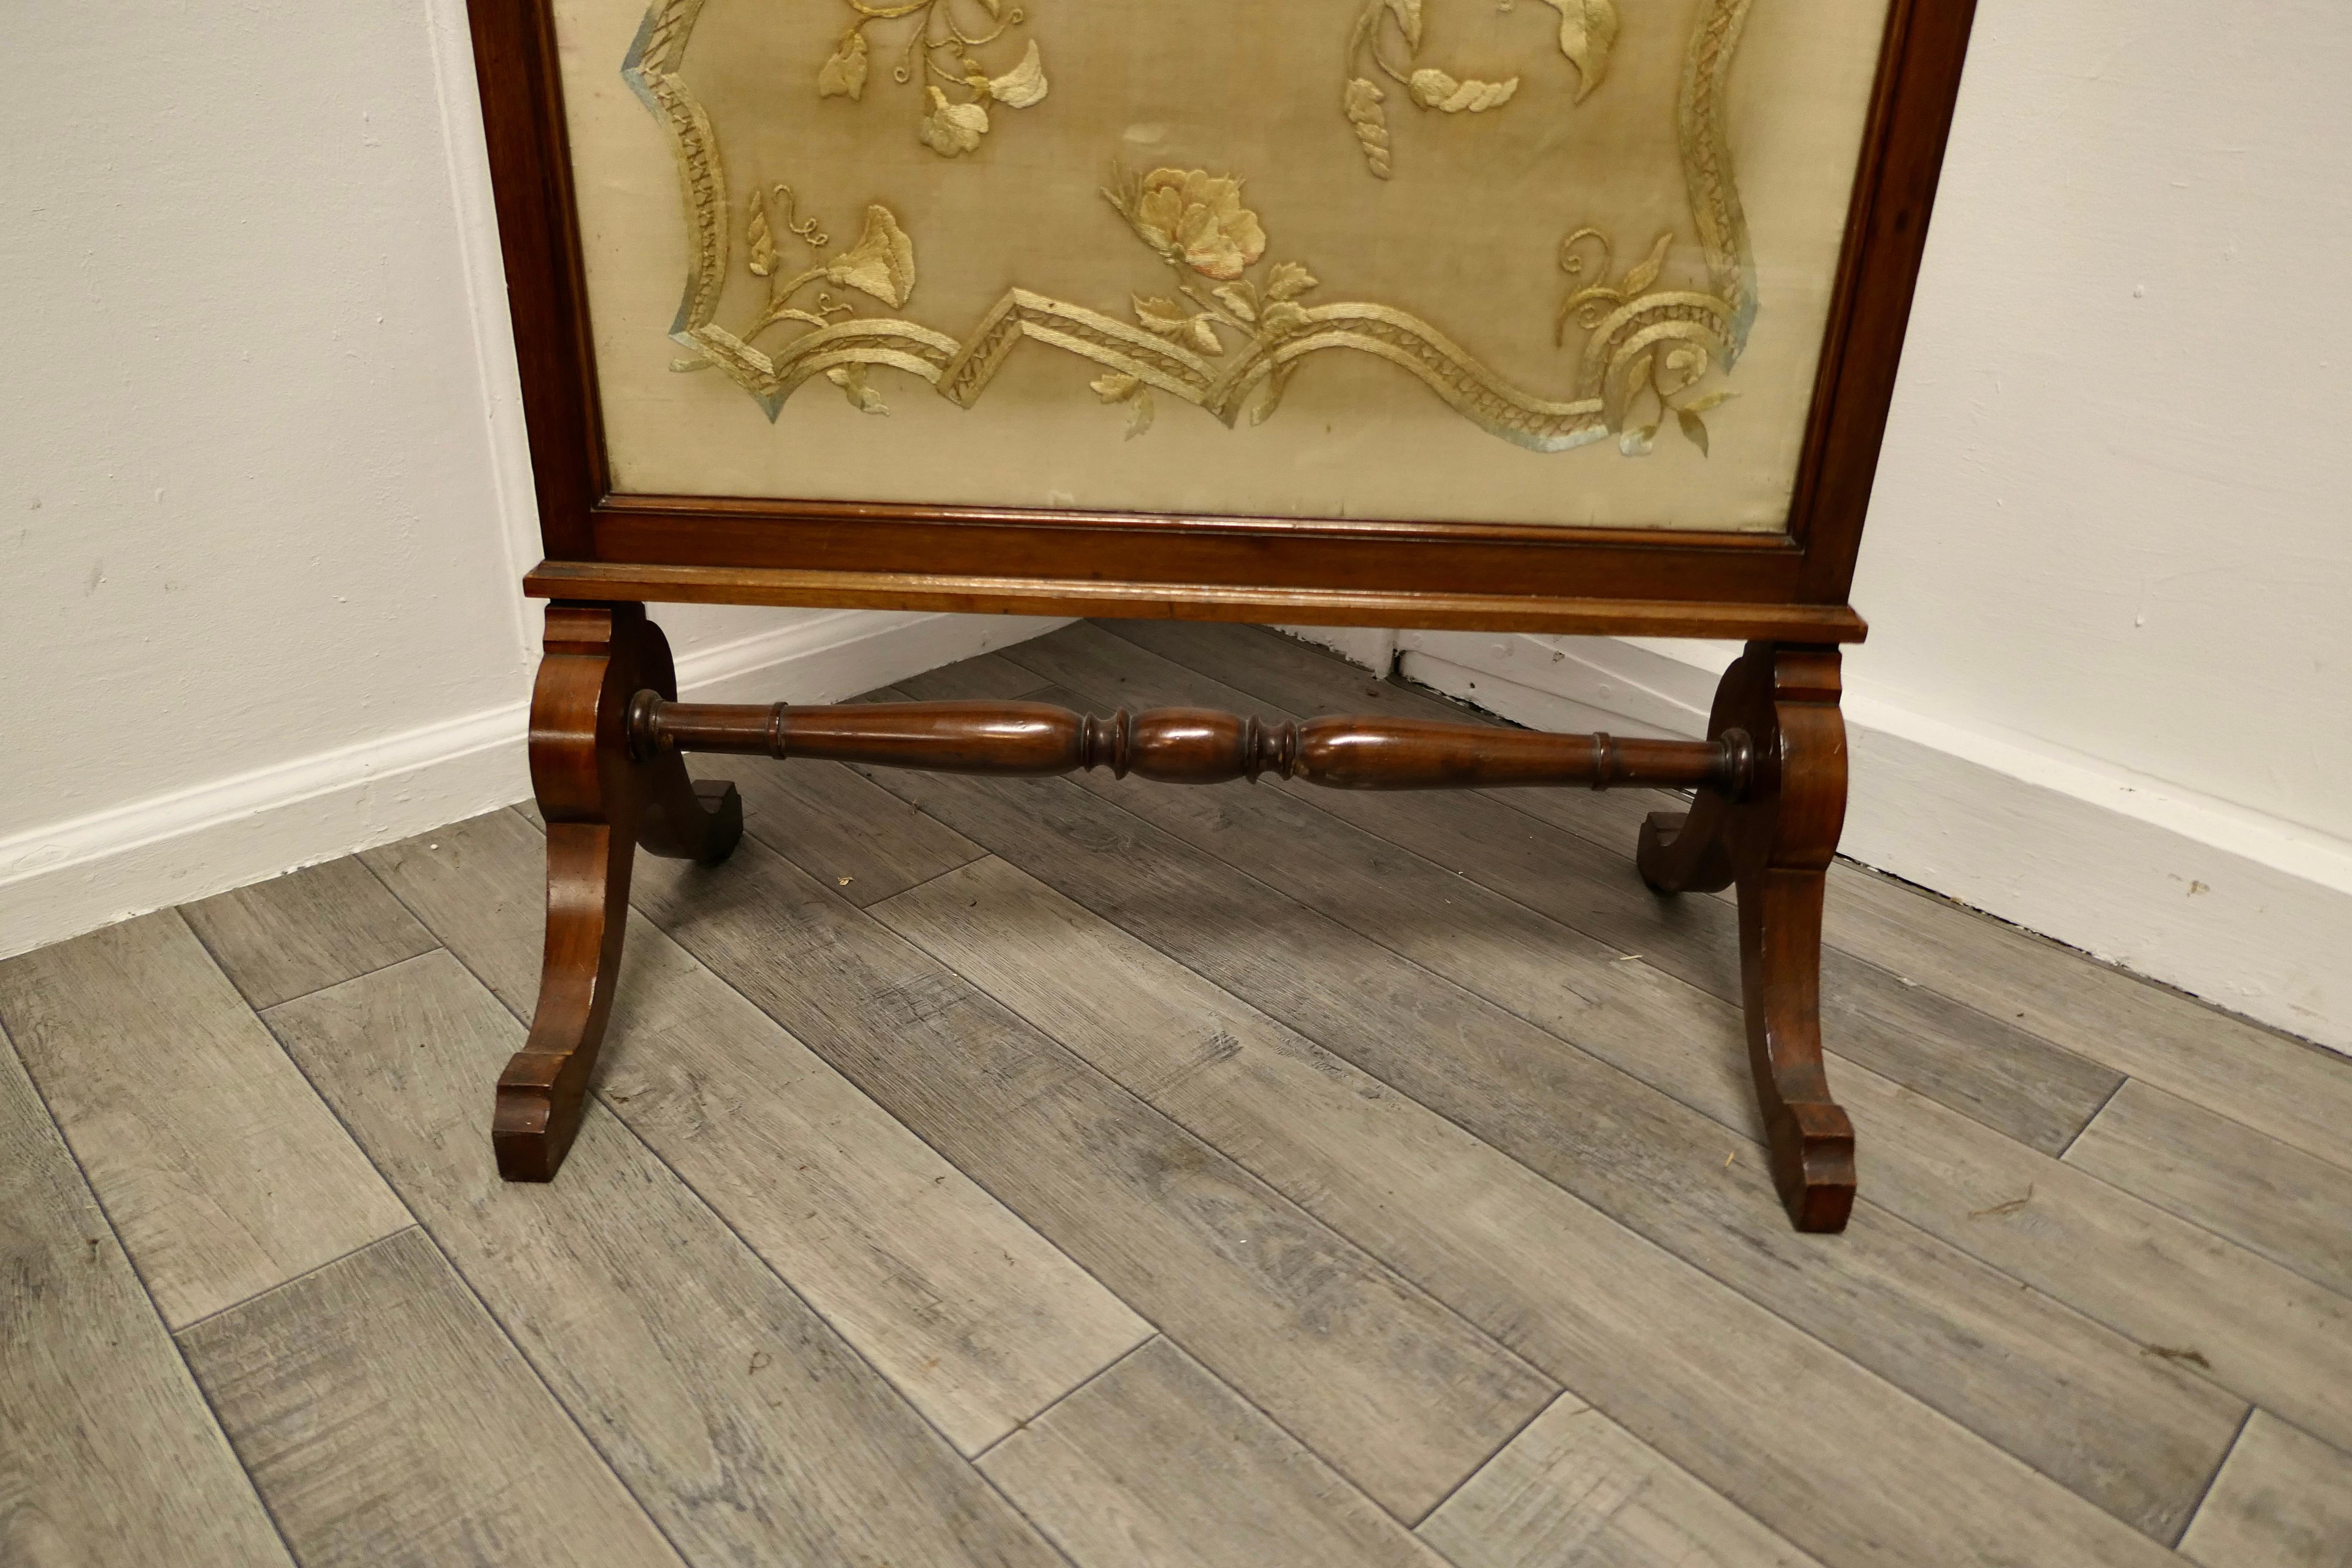 Victorian Hand embroidered silk and mahogany fire screen

This is a fine-looking piece, it is a large screen 
The silk inset has been protected with glass so it is in original condition with a little fading due to the light
The Regency style